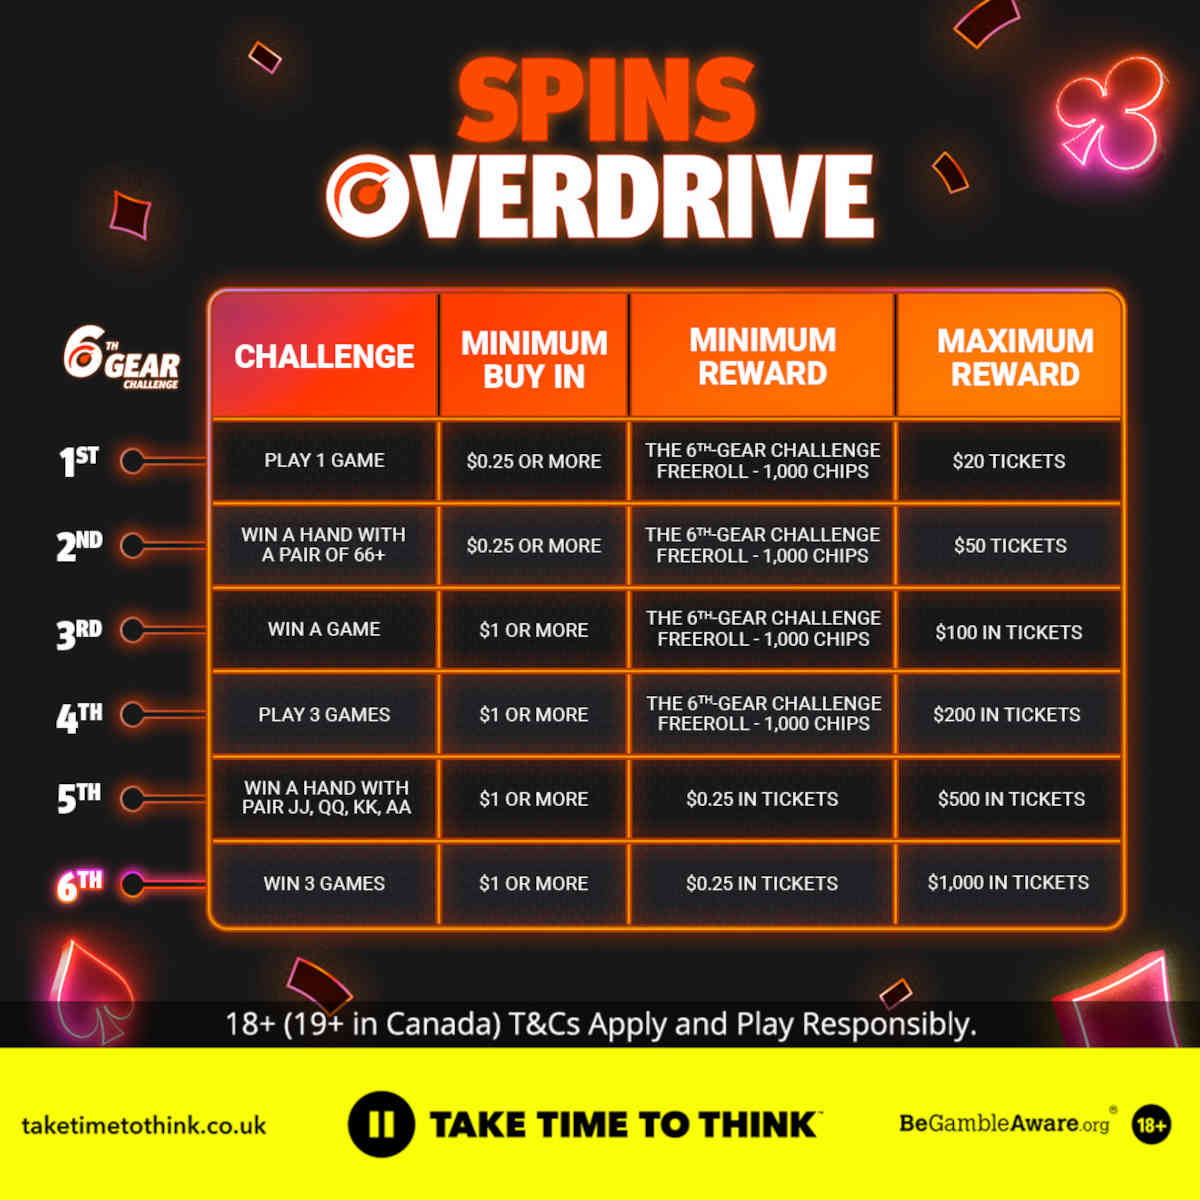 spins overdrive 6th gear